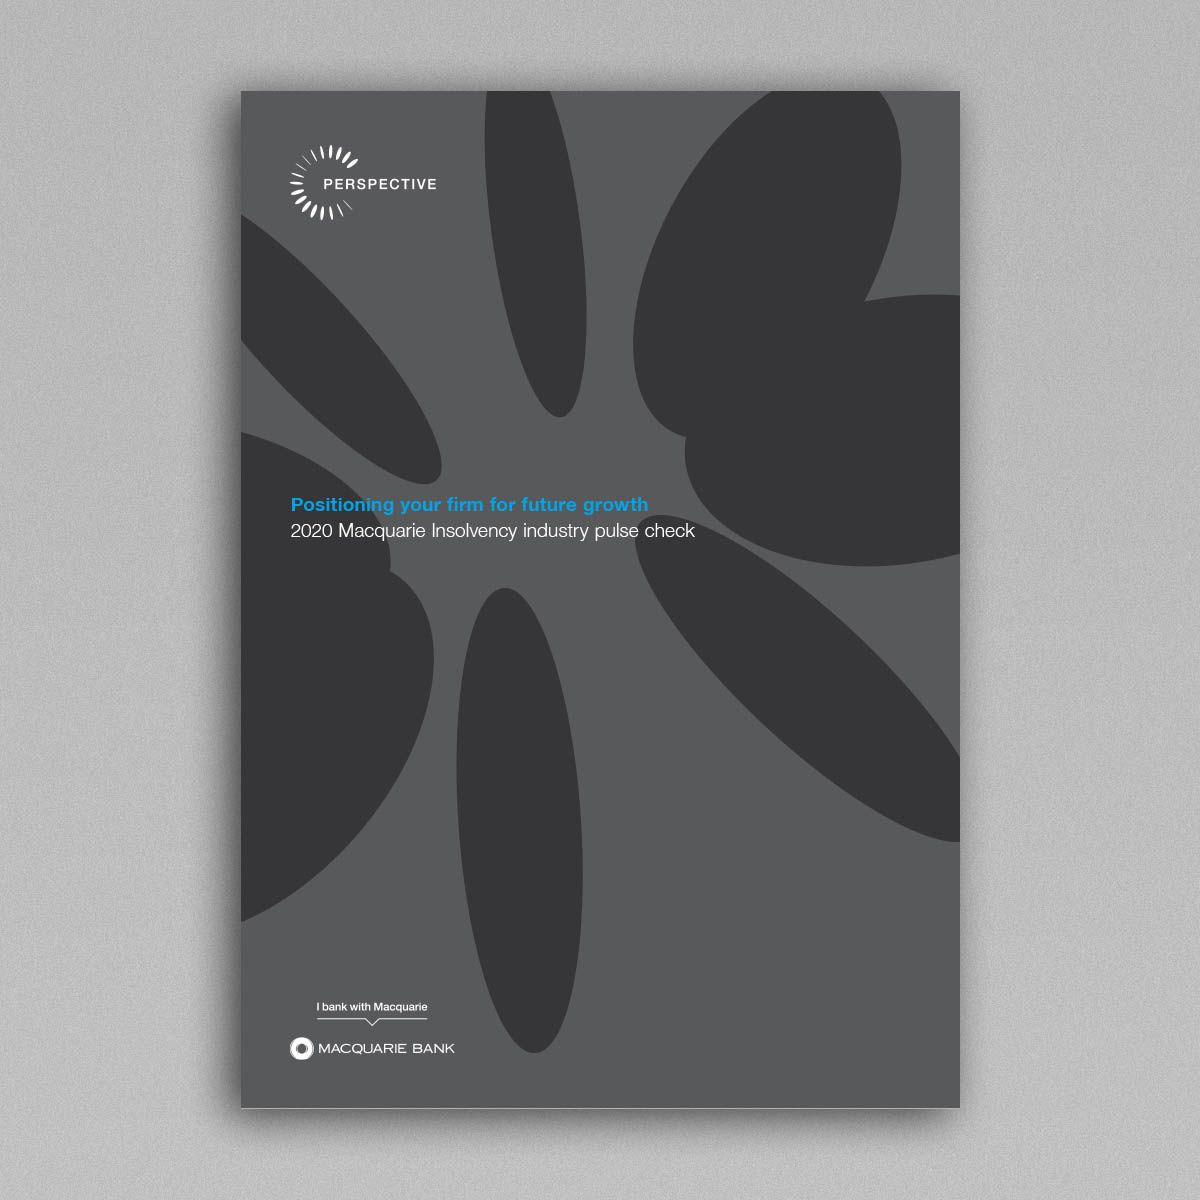 Image of front cover of Insolvency pulse check report on a grey background